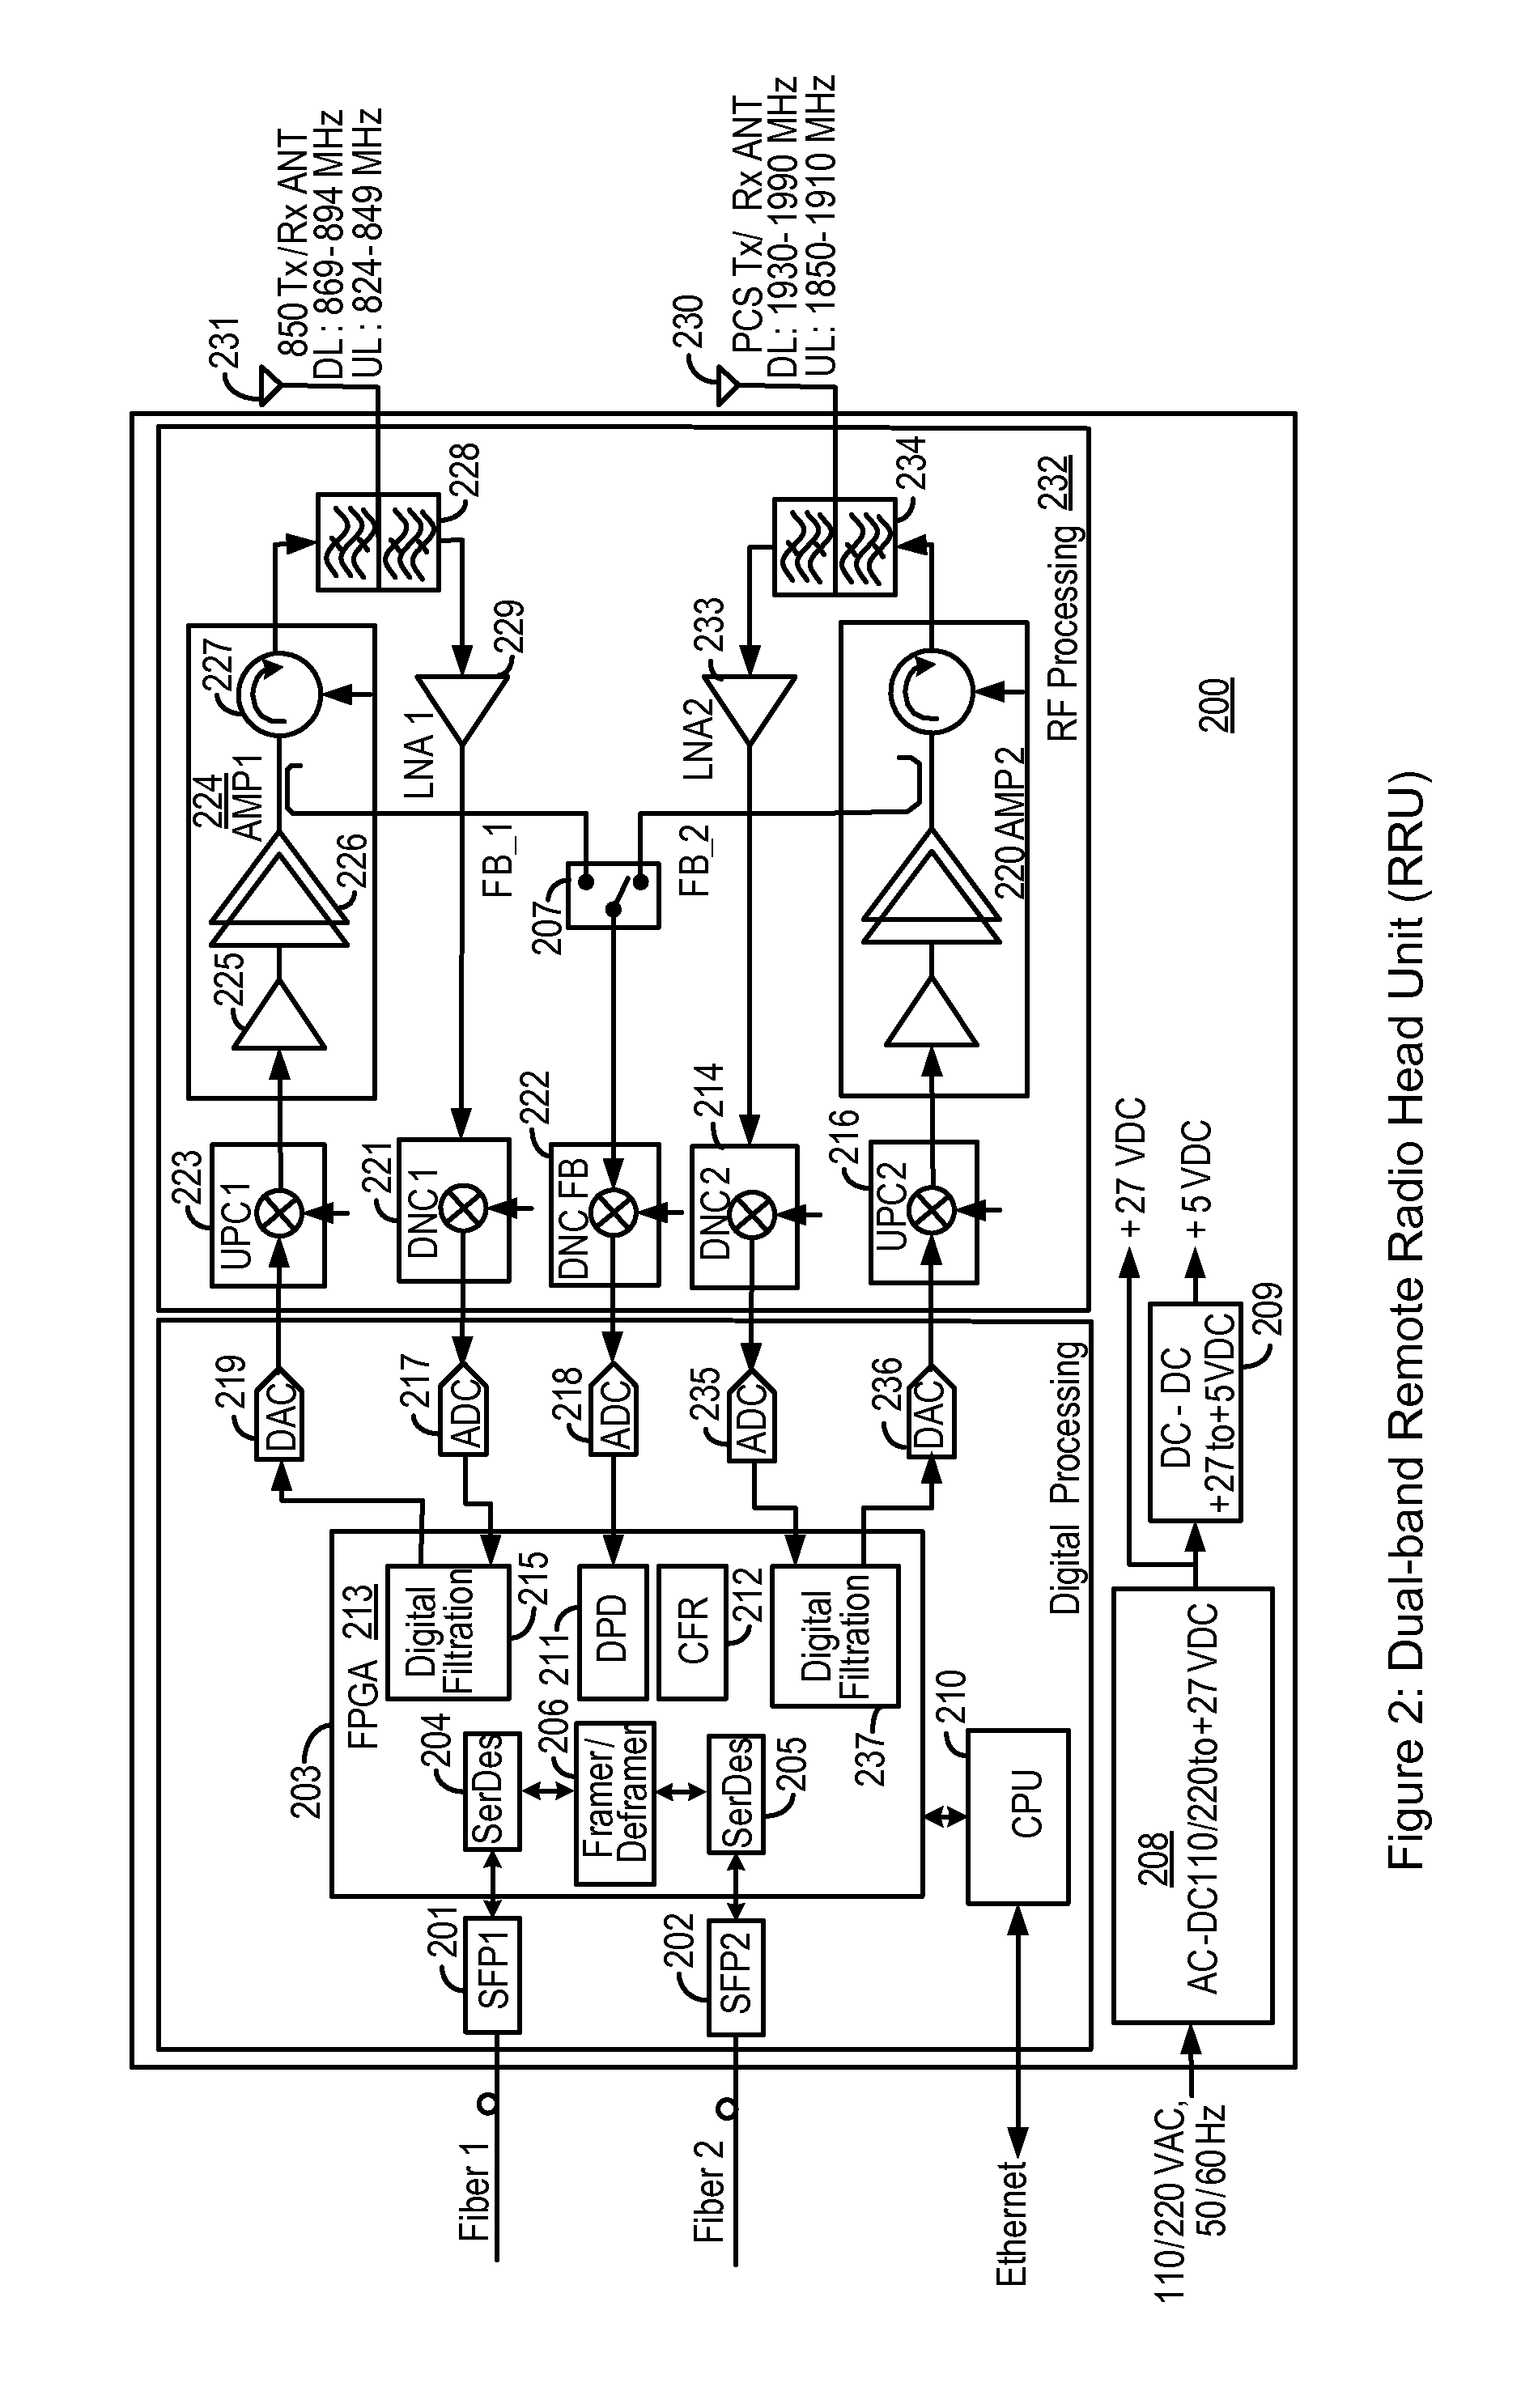 Software configurable distributed antenna system and method for reducing uplink noise